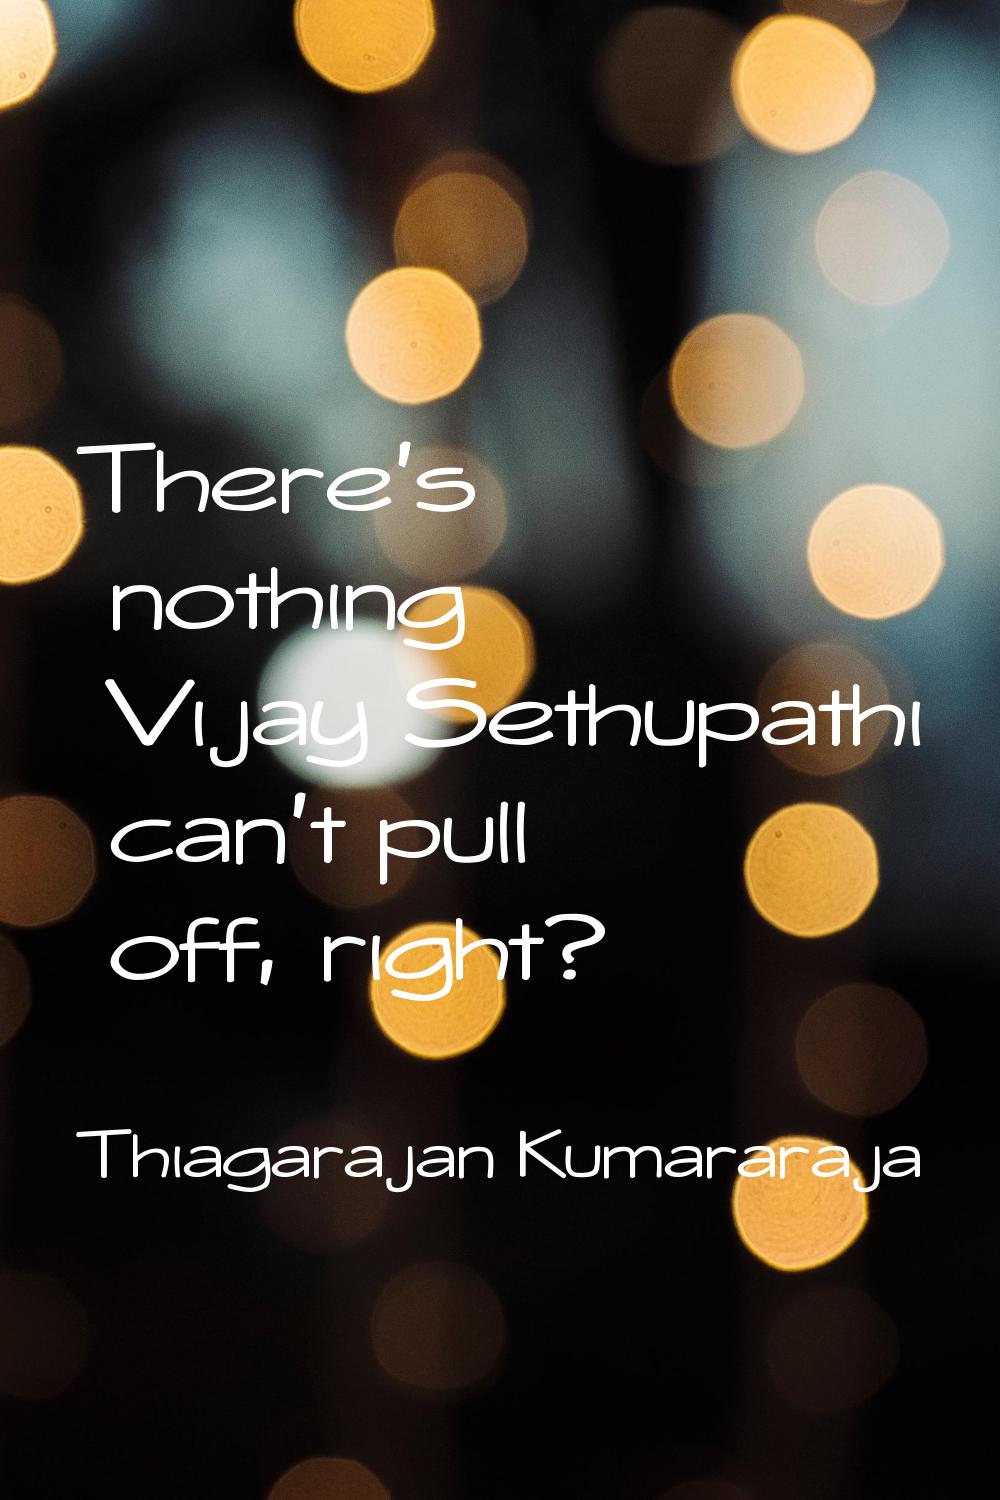 There's nothing Vijay Sethupathi can't pull off, right?